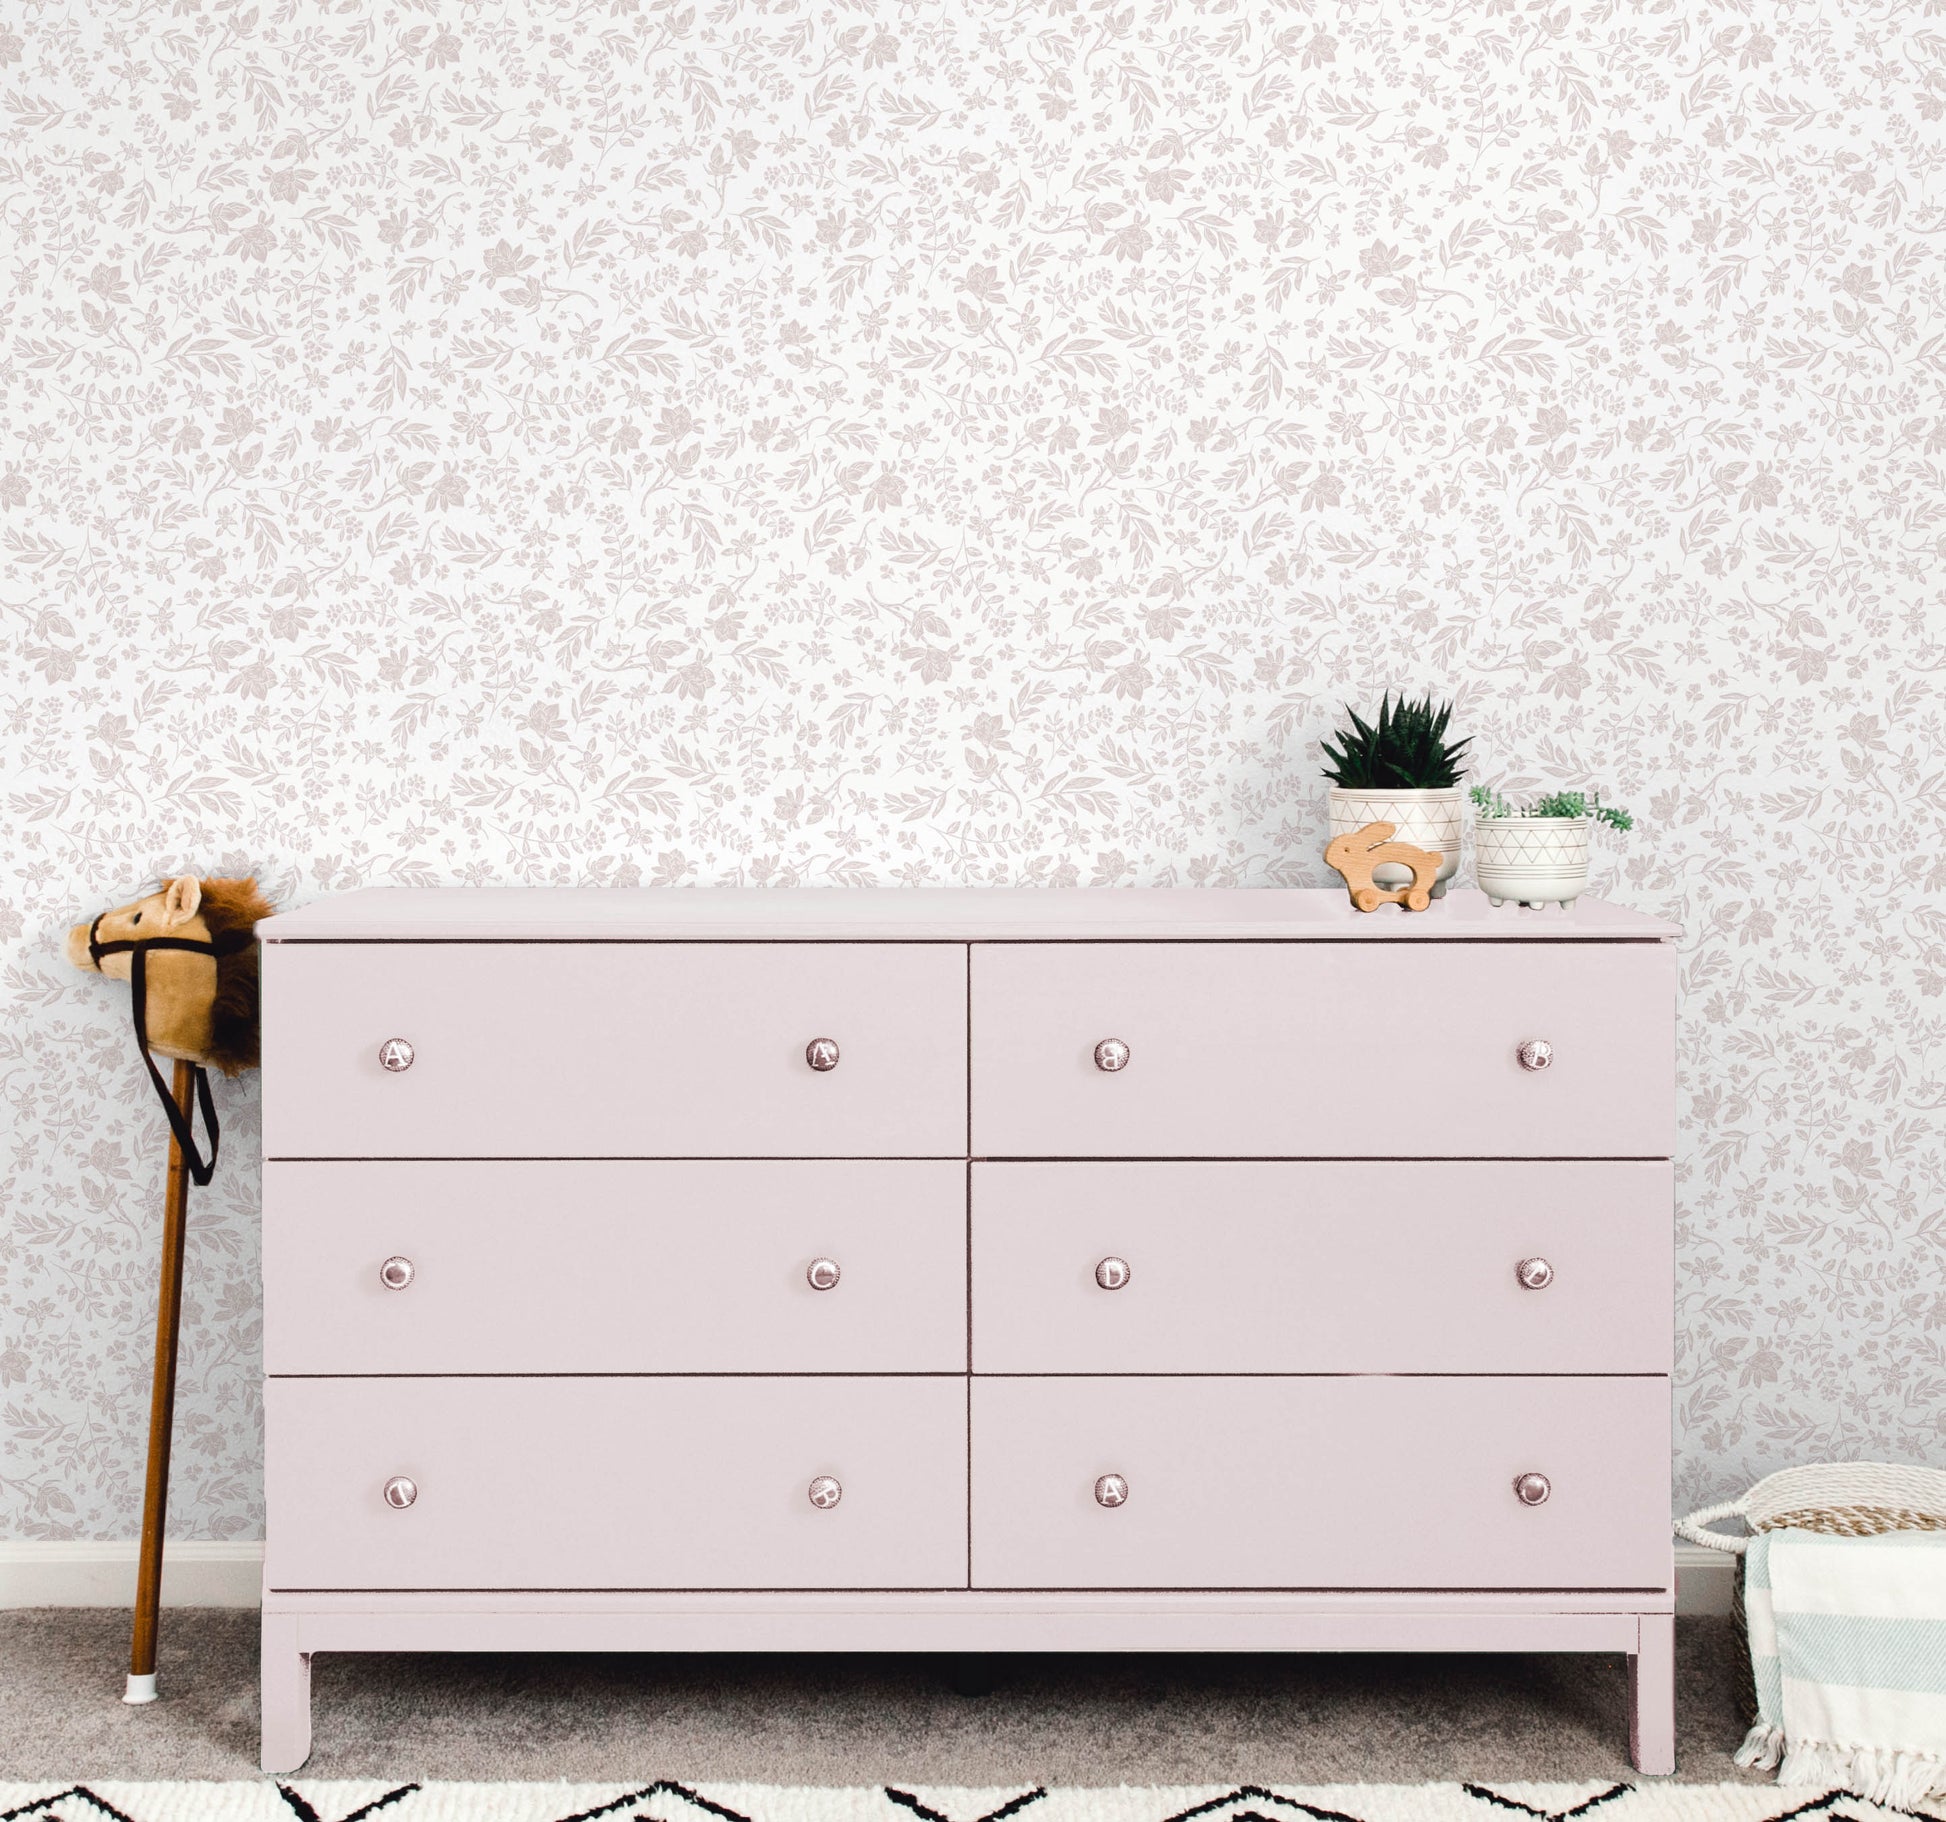 Removable Wallpaper - Isabella (Blush) - Wallpaper - Fable and Fawn 